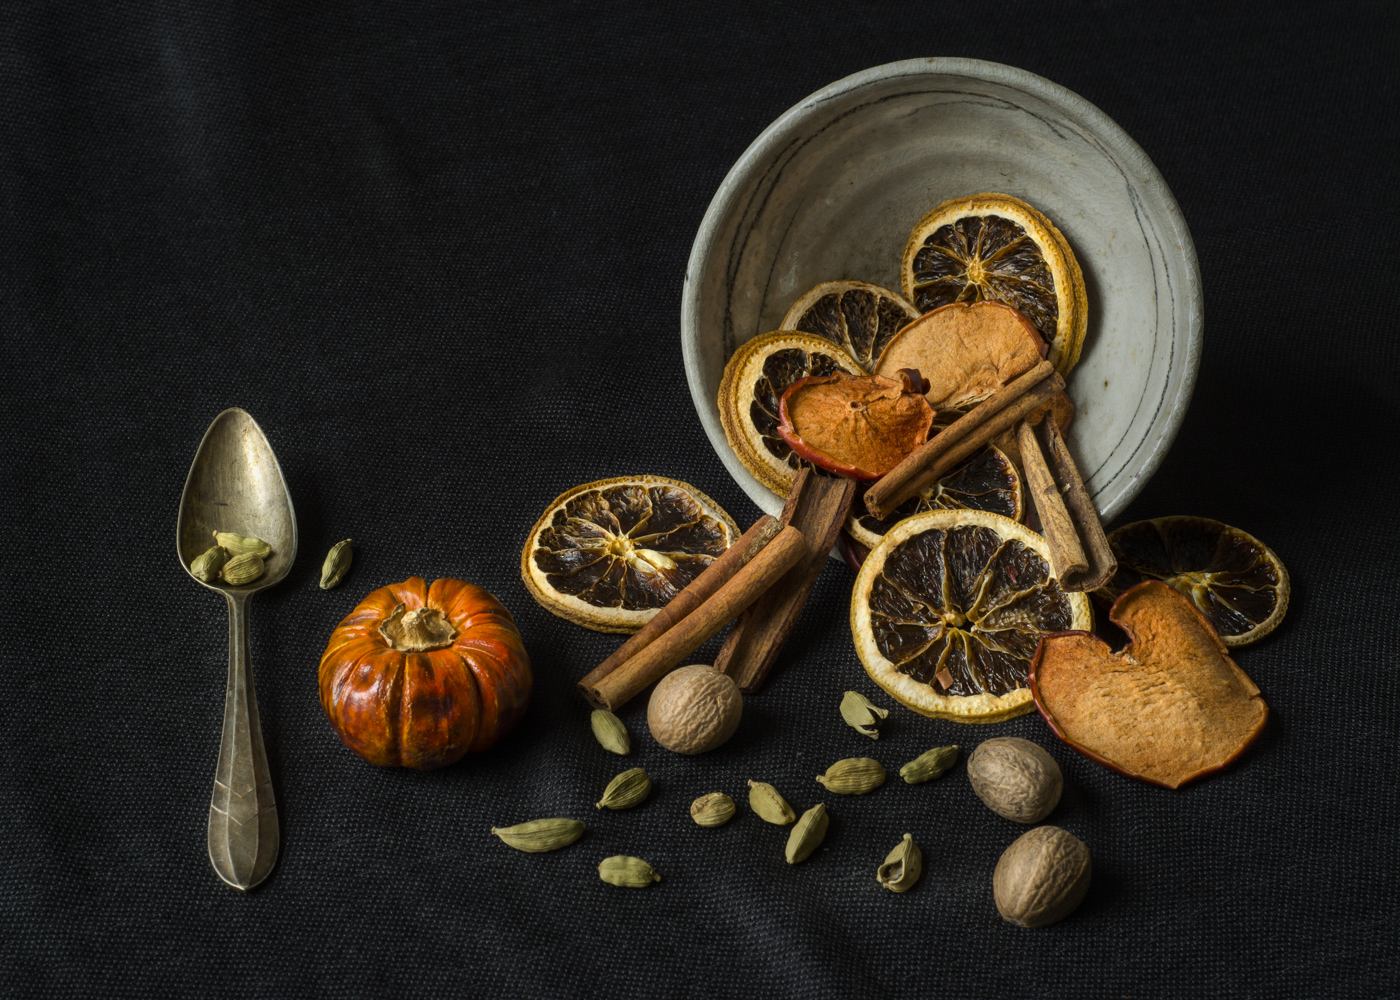 Pot pourri with spoon by Kirsten Bax